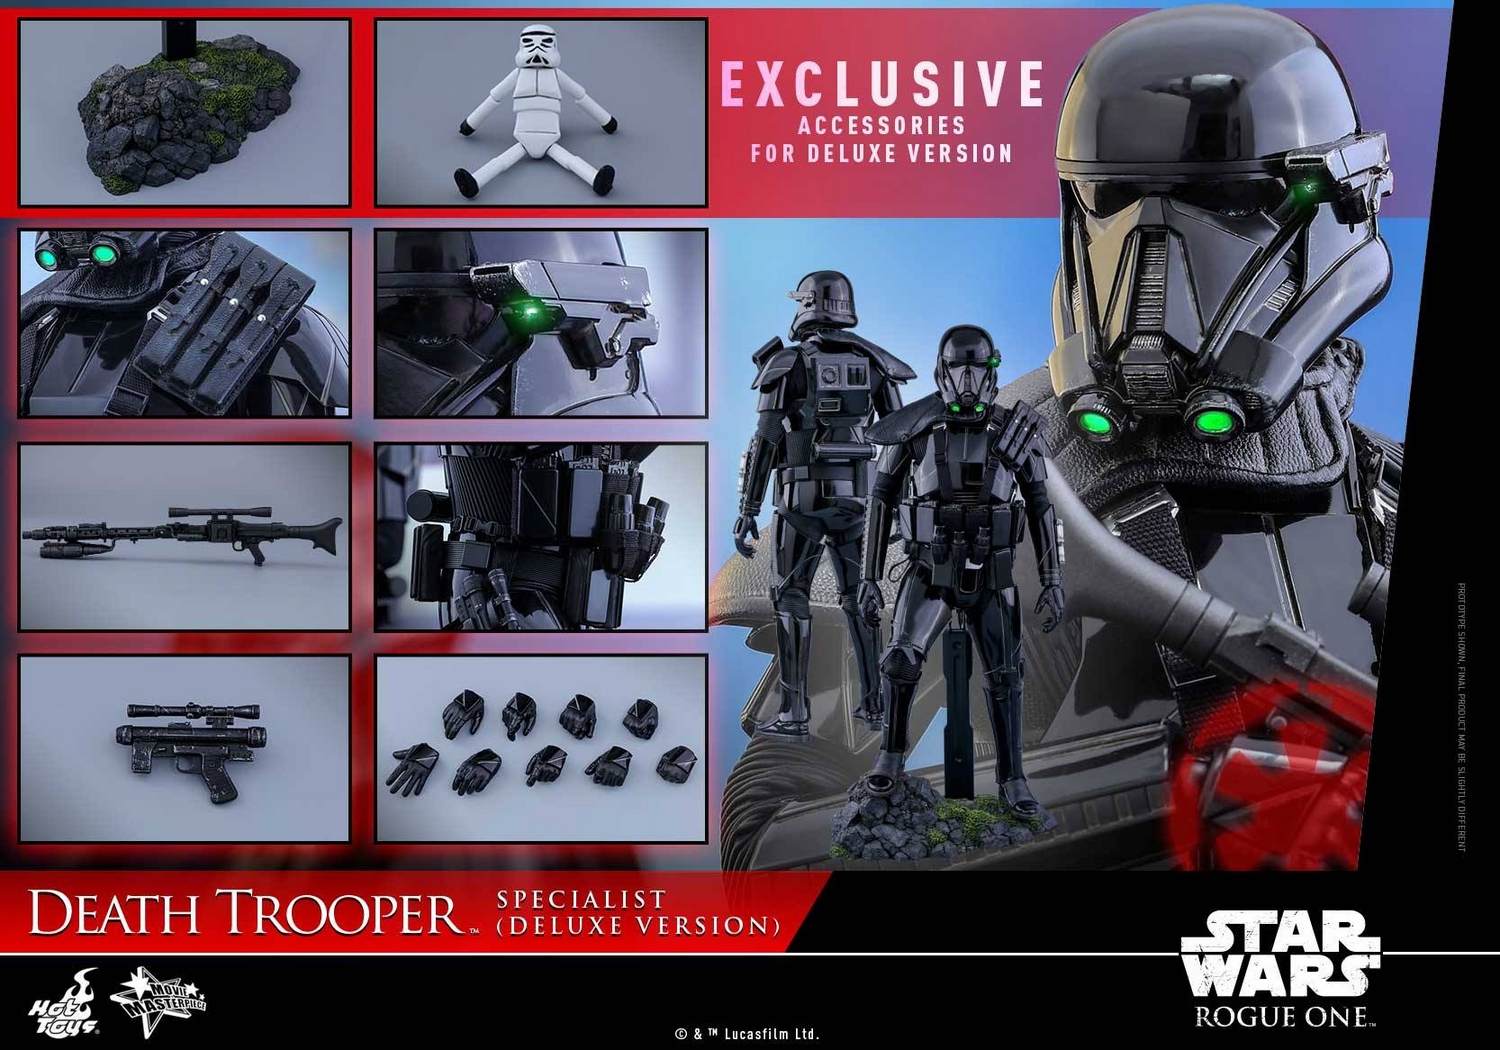 rogue-one-sixth-scale-death-trooper-specialist-deluxe-version-111516-006.jpg